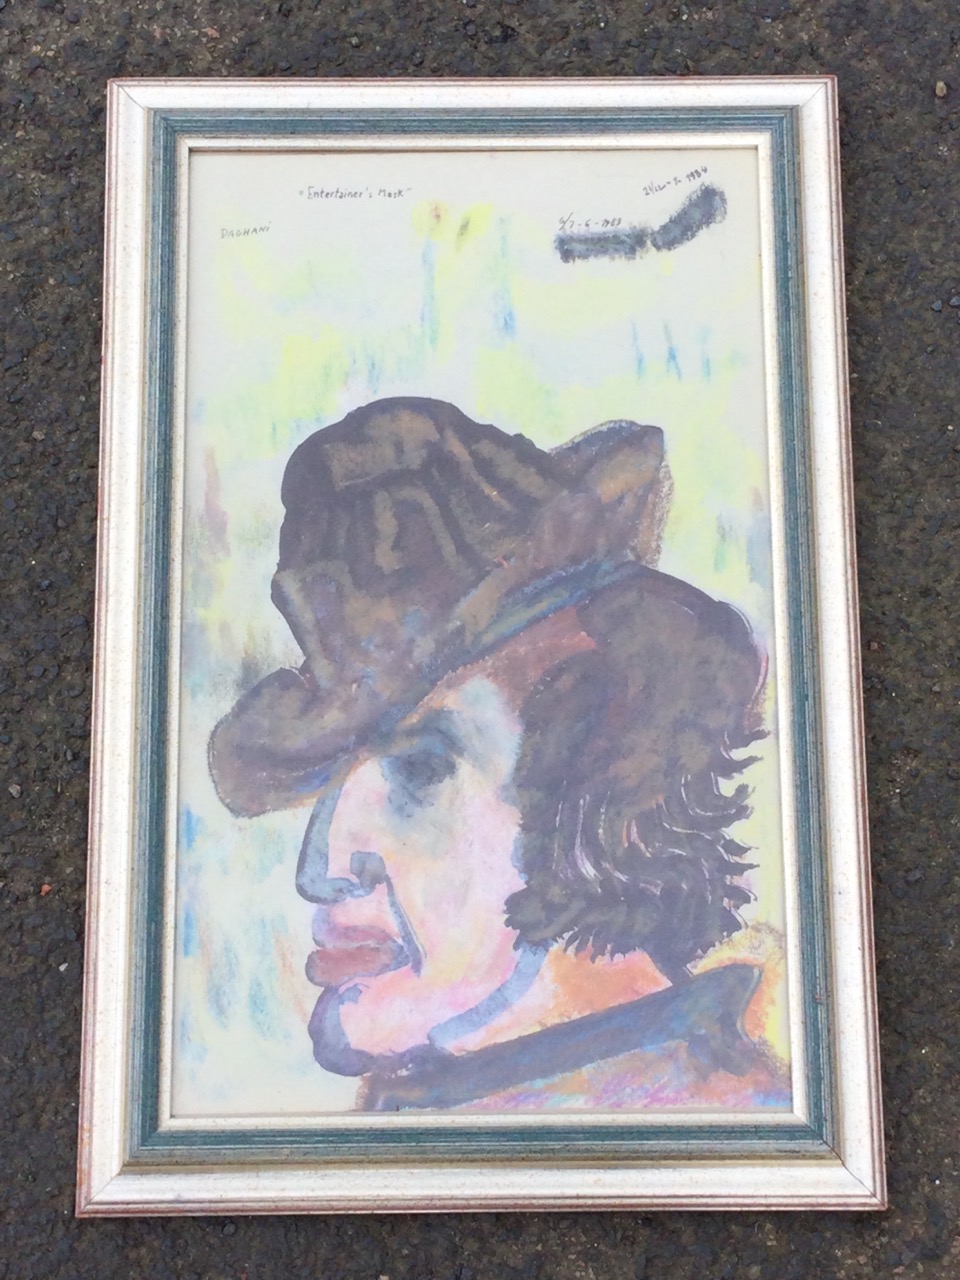 Arnold Daghani, watercolour & pastel, self portrait as a clown, titled Entertainers Mask, signed & - Image 2 of 3